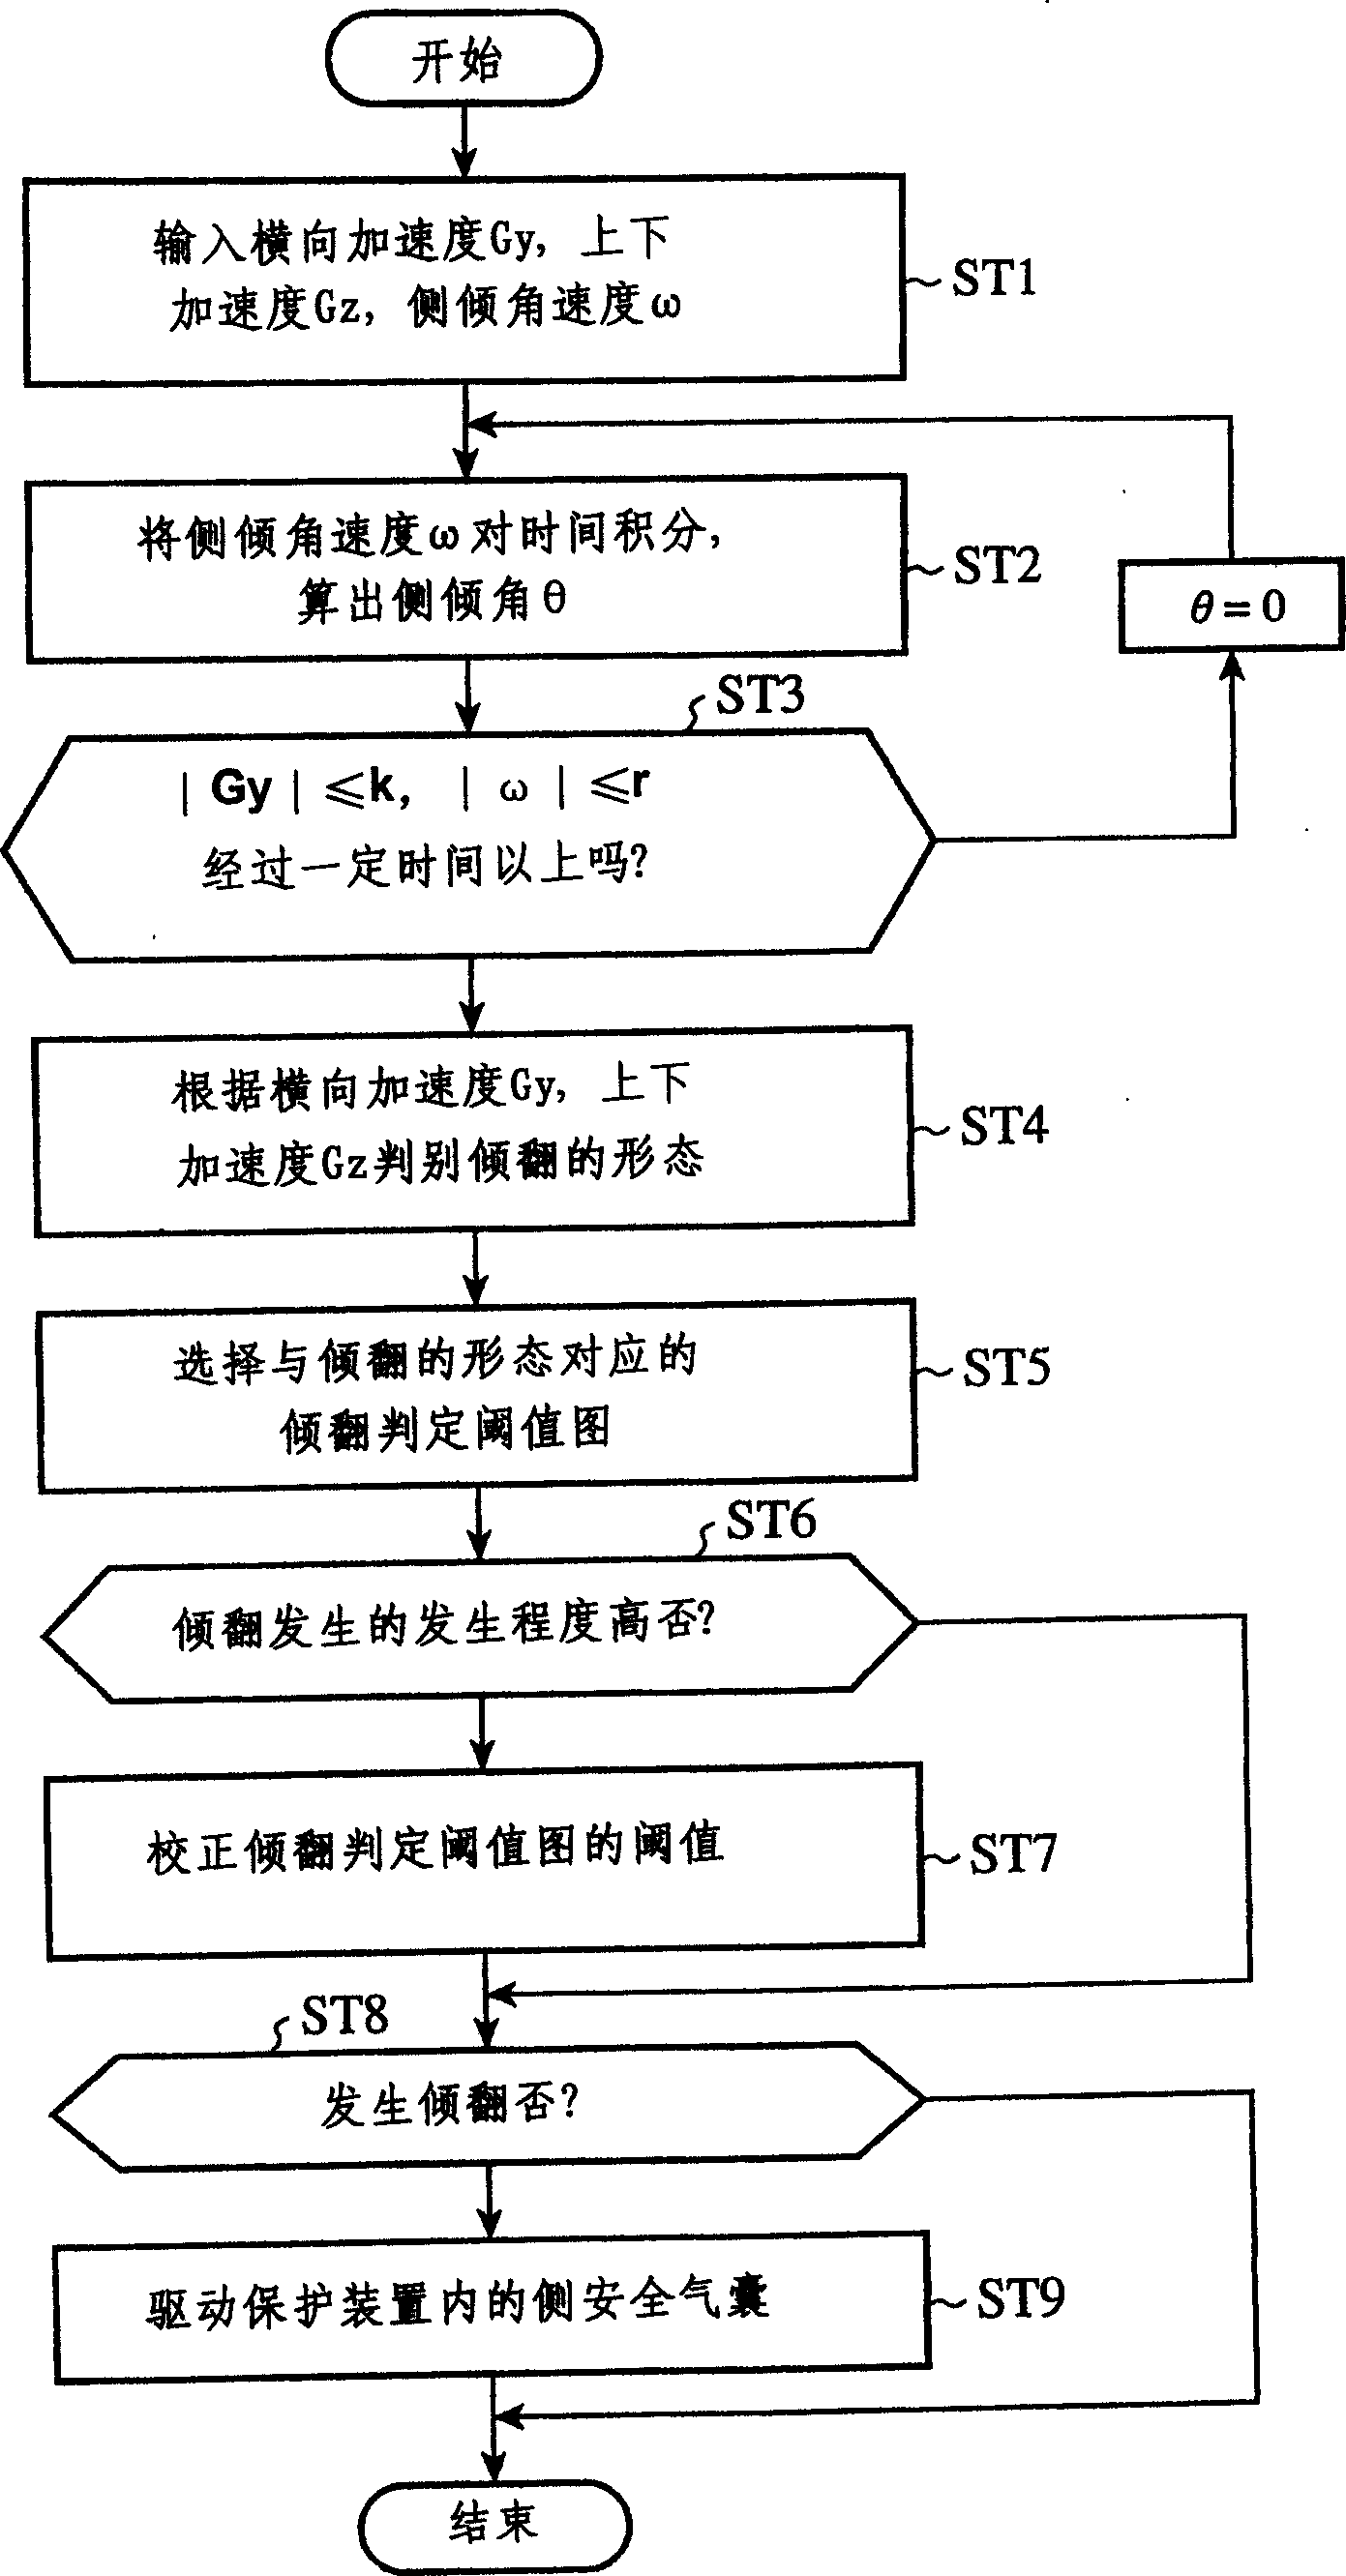 Vehicle-rollover detecting apparatus and vehicle-rollover detecting method